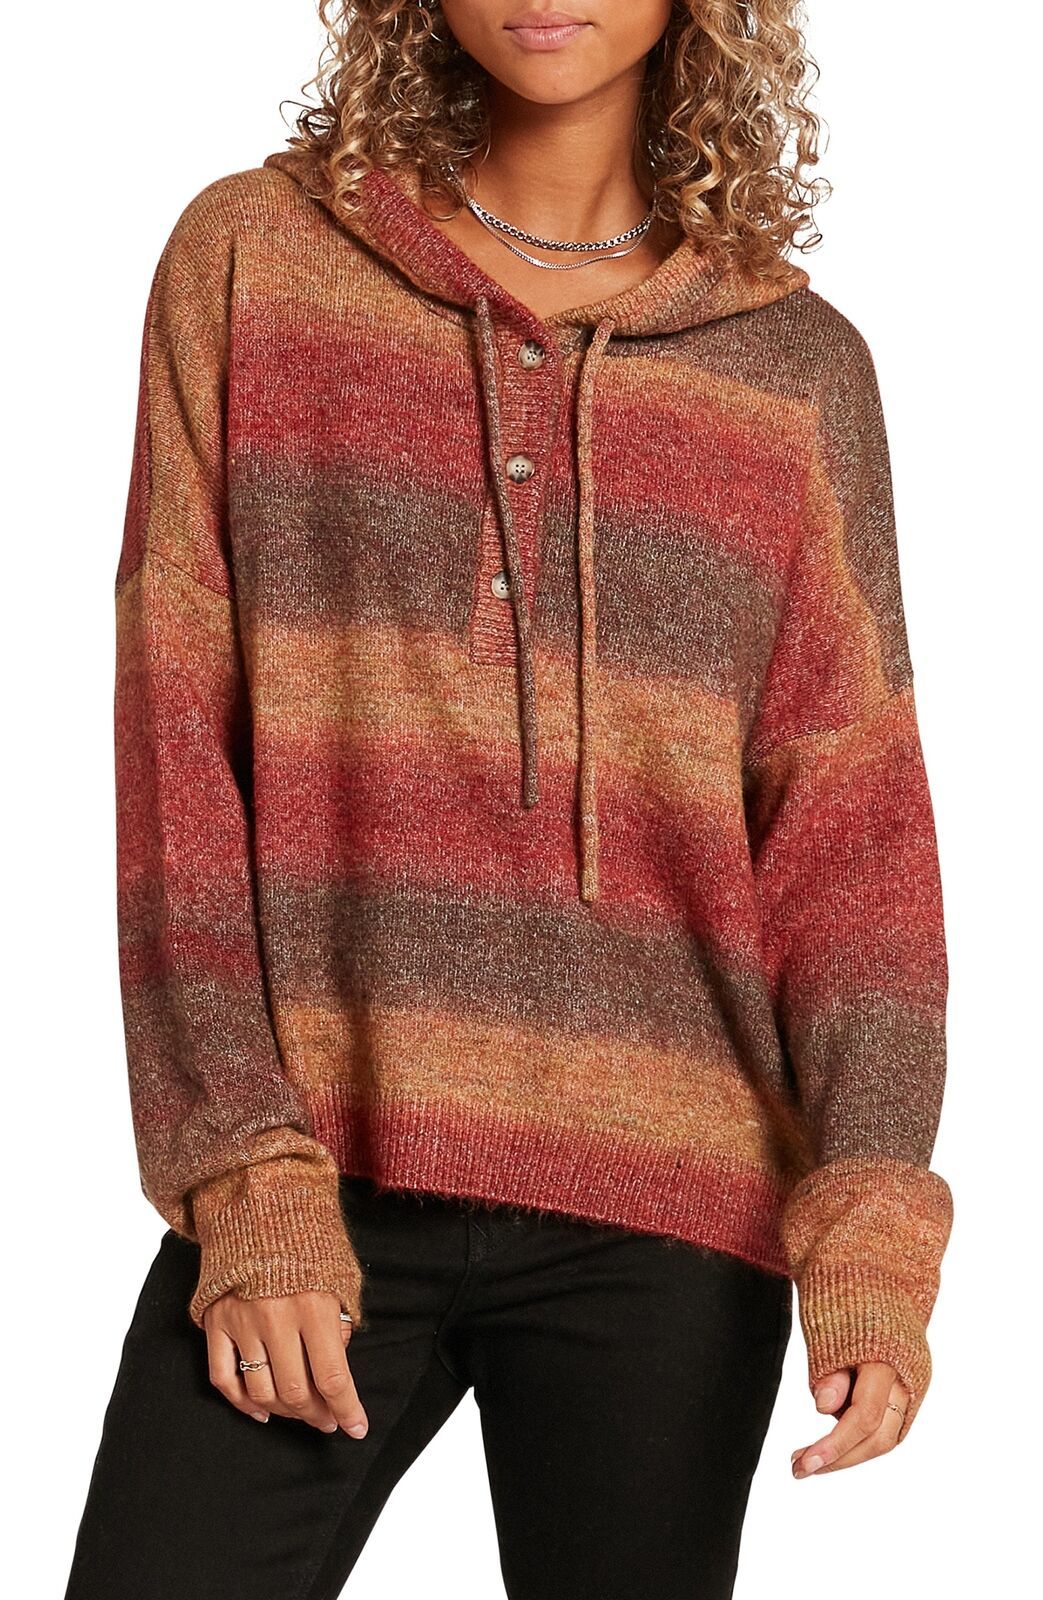 Primary image for Volcom NUTMEG Women's Juniors' Was It You Striped Hooded Sweater, US Medium